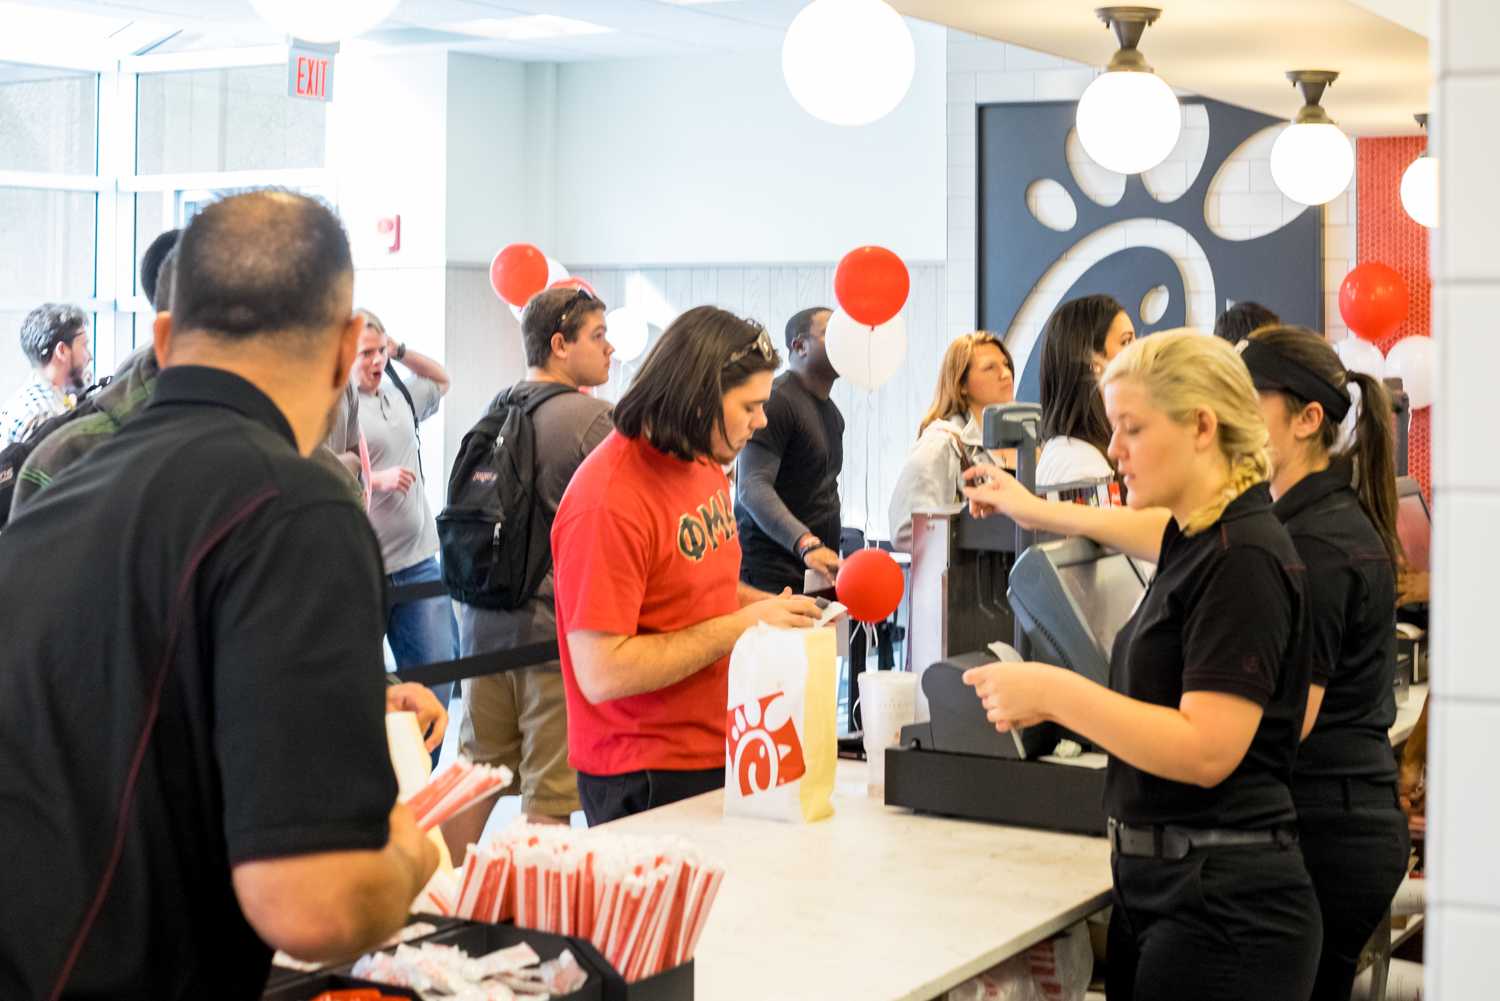 Students buying lunch at FAU's Chick-fil-A Express. Mohammed F Emran | Web Editor